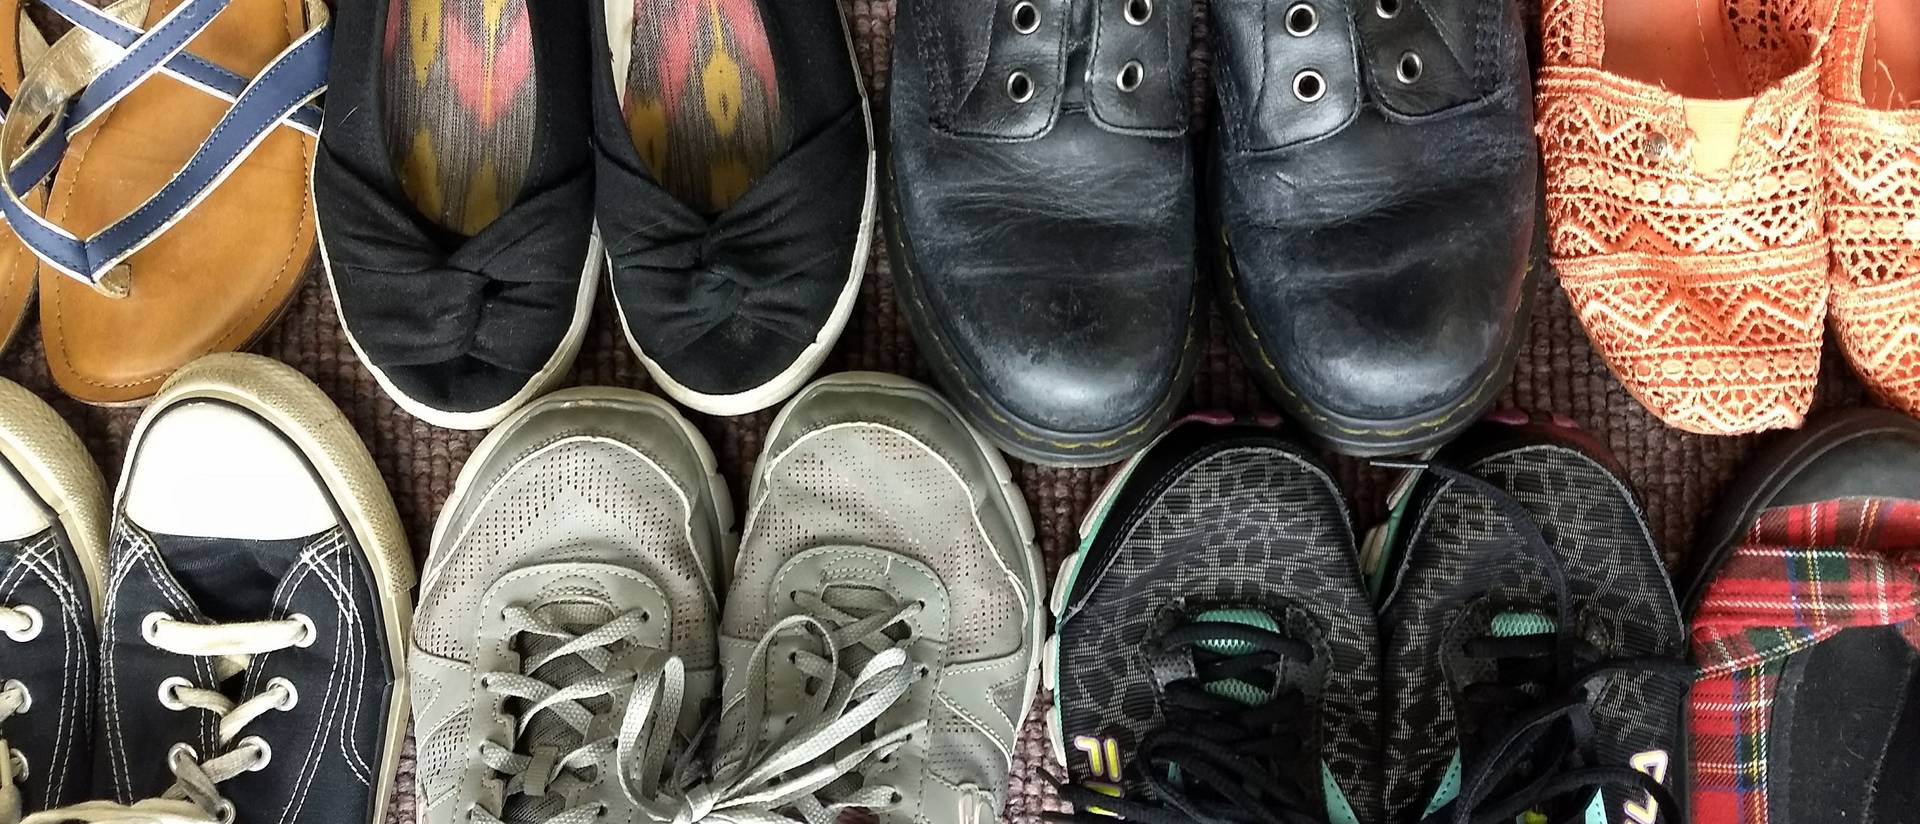 Image of shoes collected for the 2018 Soles4Souls shoe drive